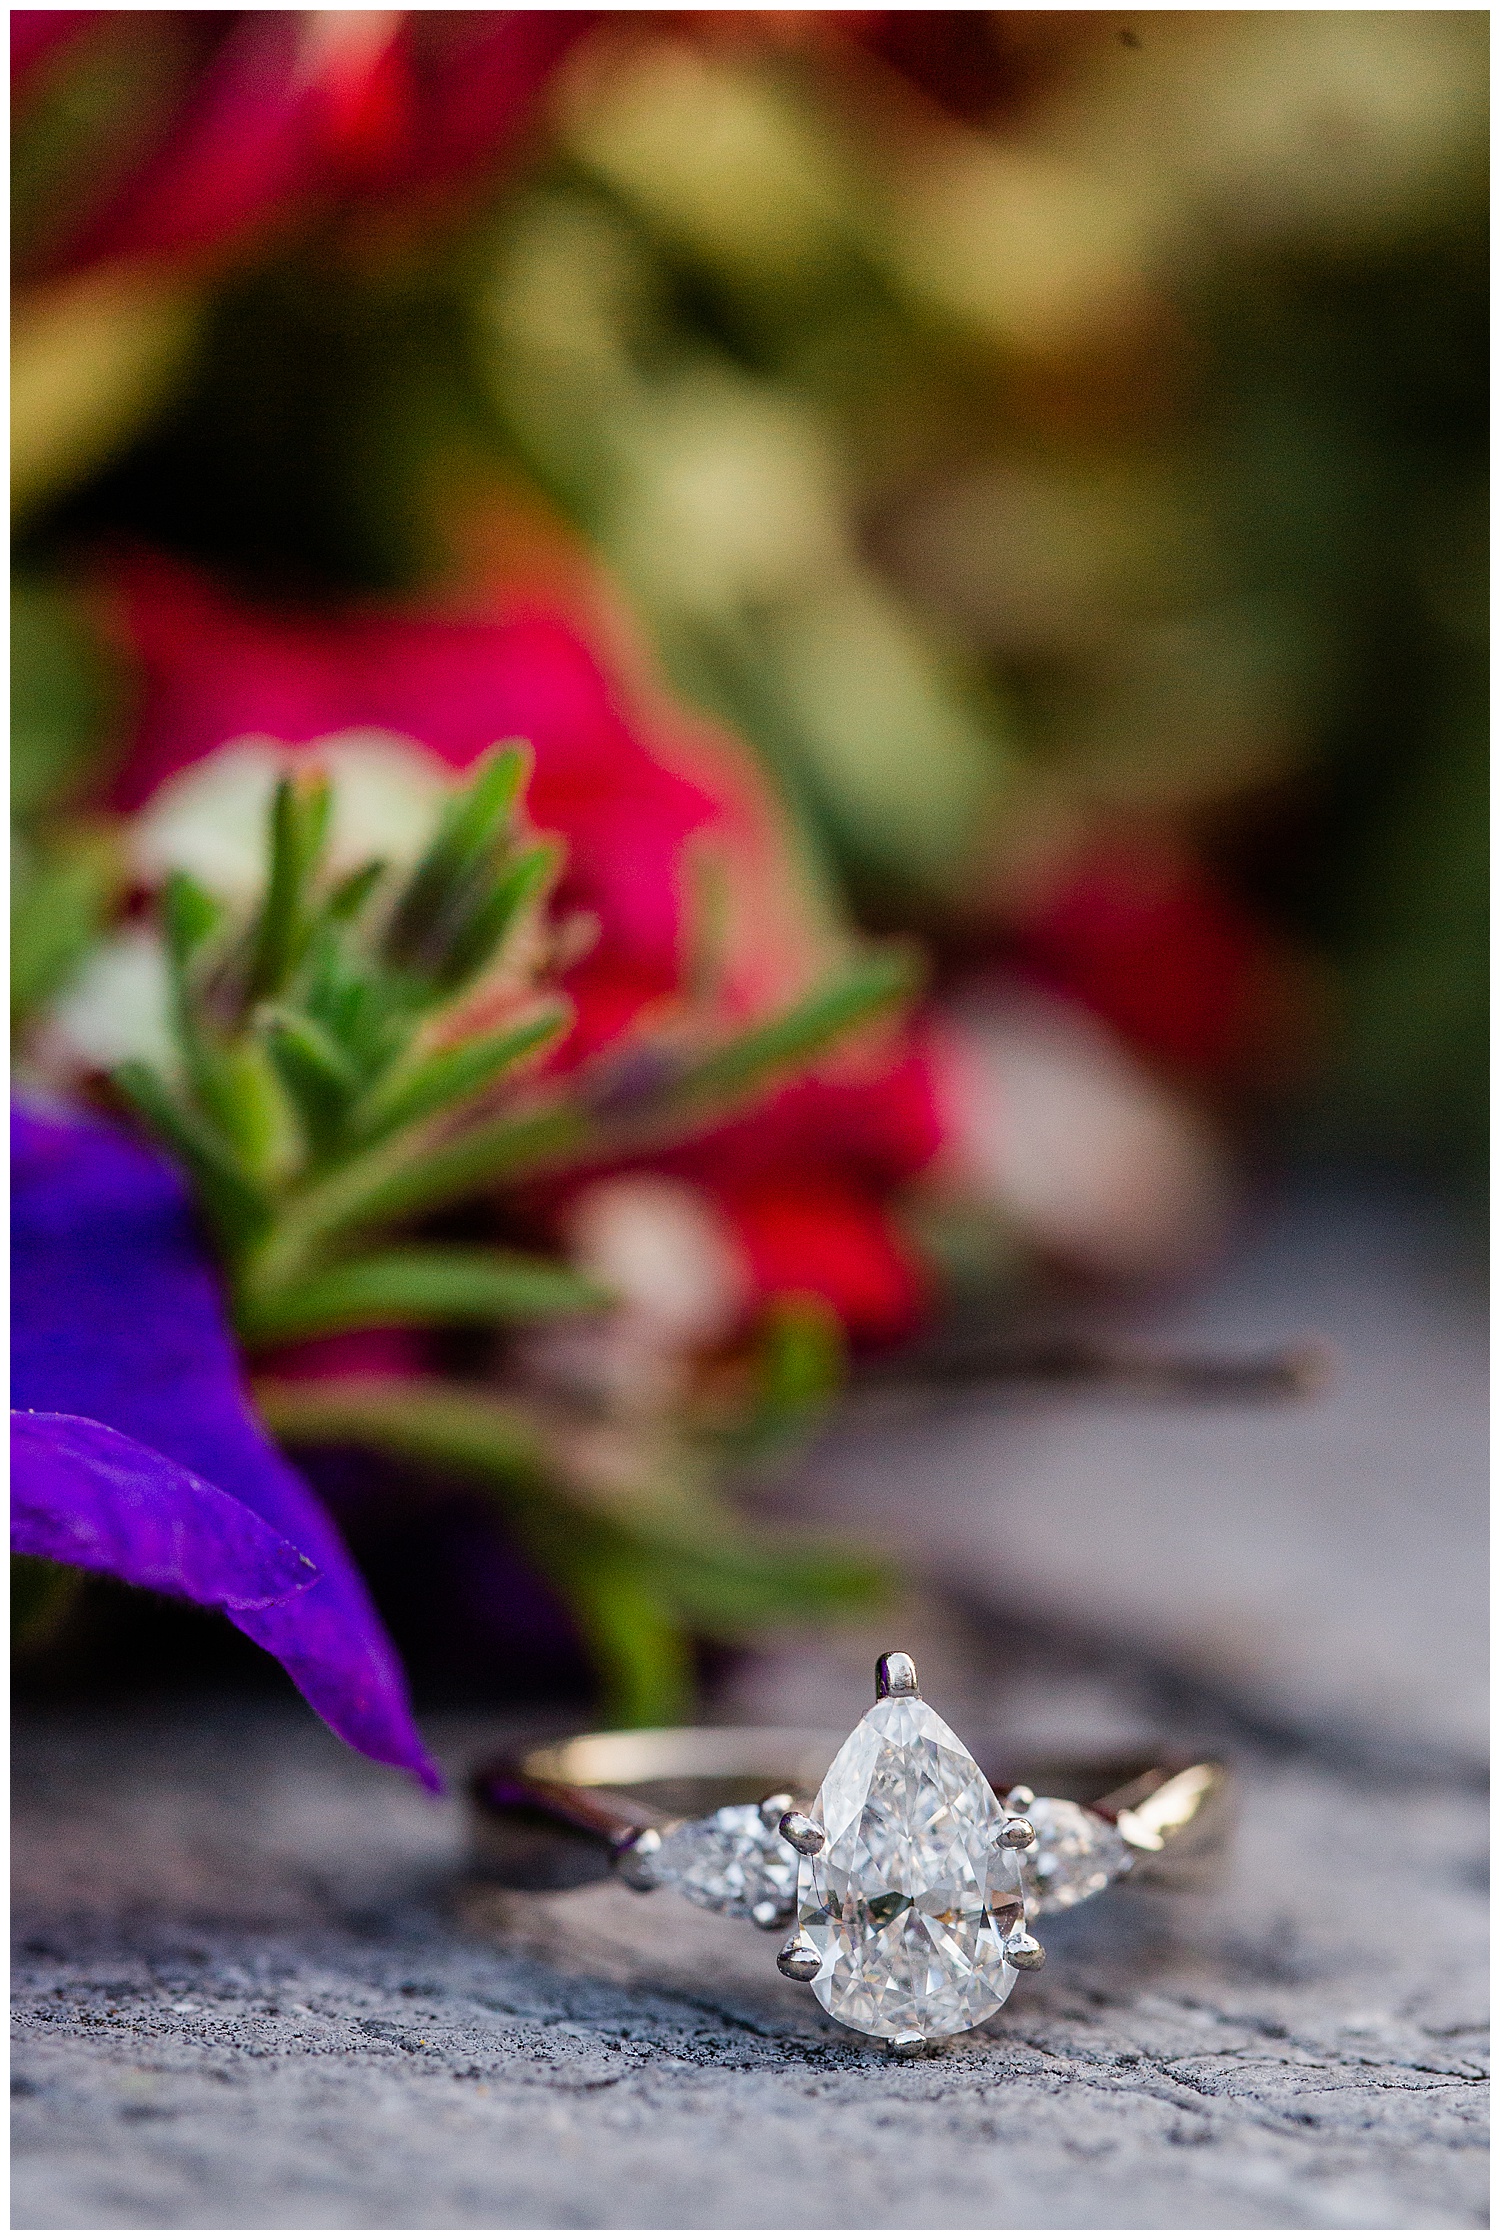 Oval engagement ring in front of purple and red flowers